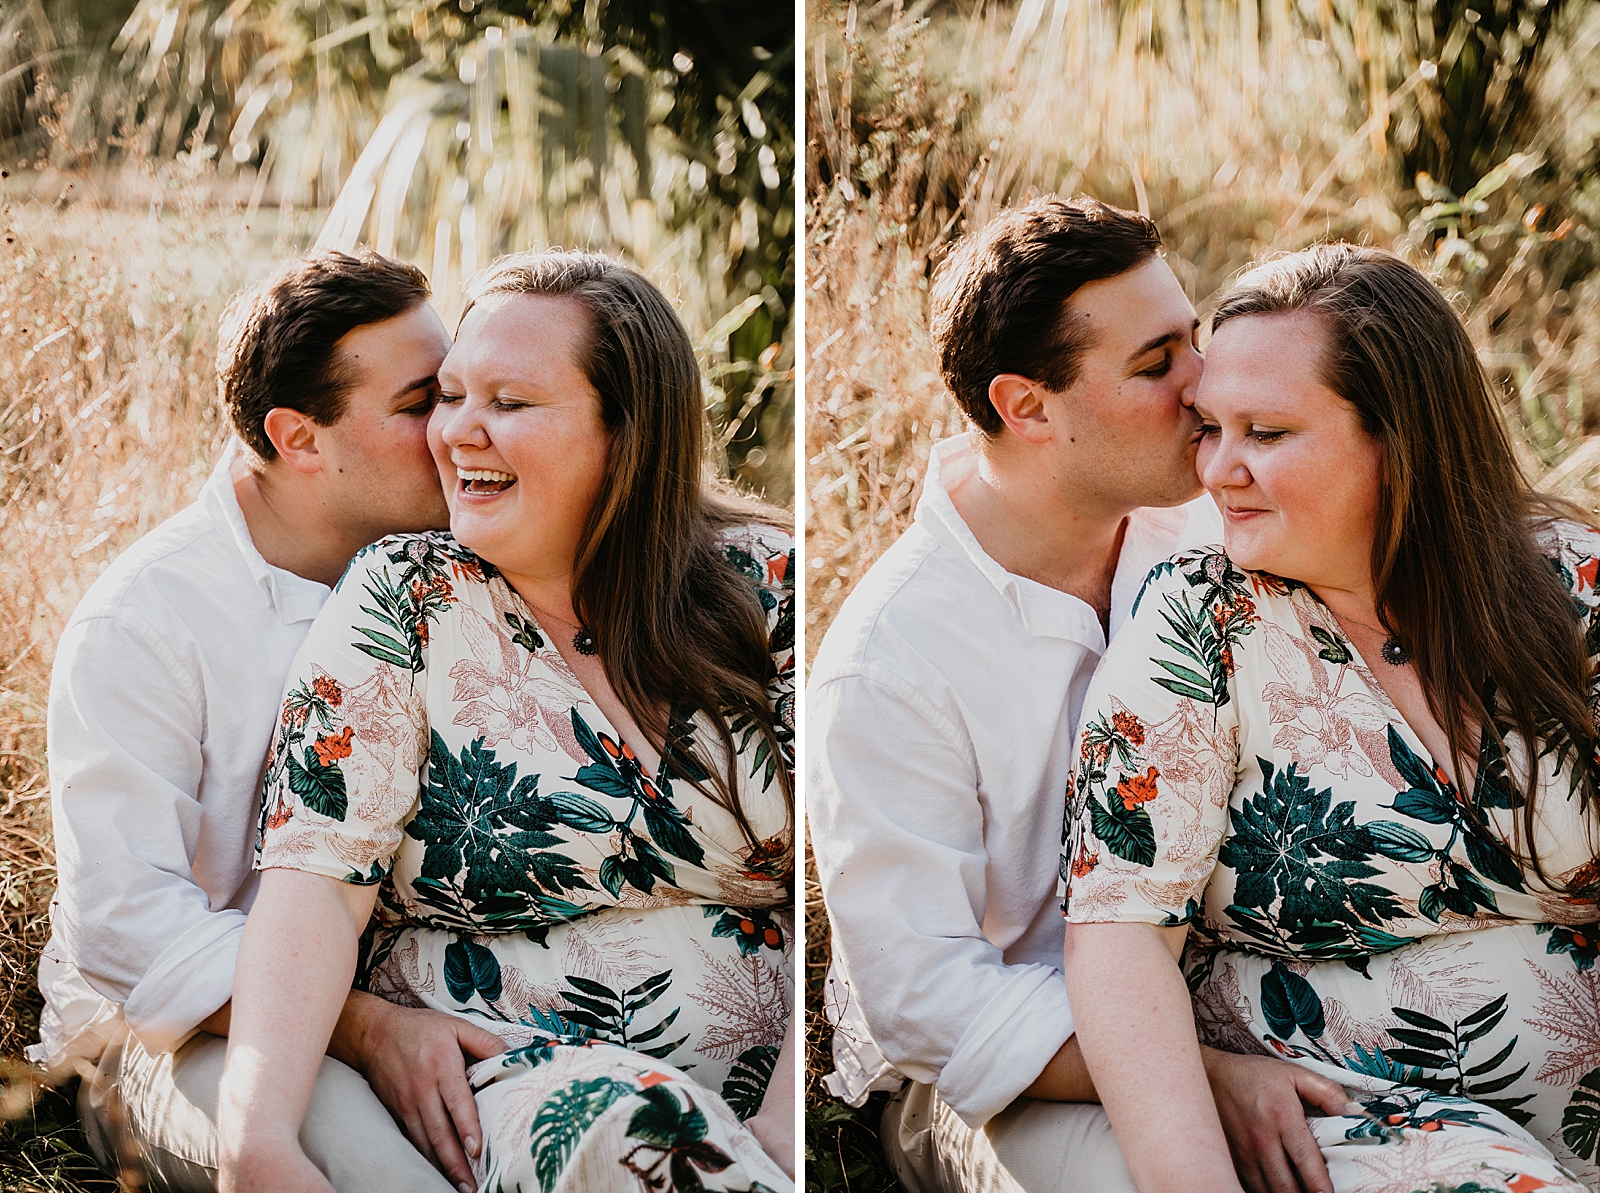 Man kisses lady on the cheek sitting on tall grass field Riverbend Park Engagement Photography captured by South Florida Engagement Photographer Krystal Capone Photography 